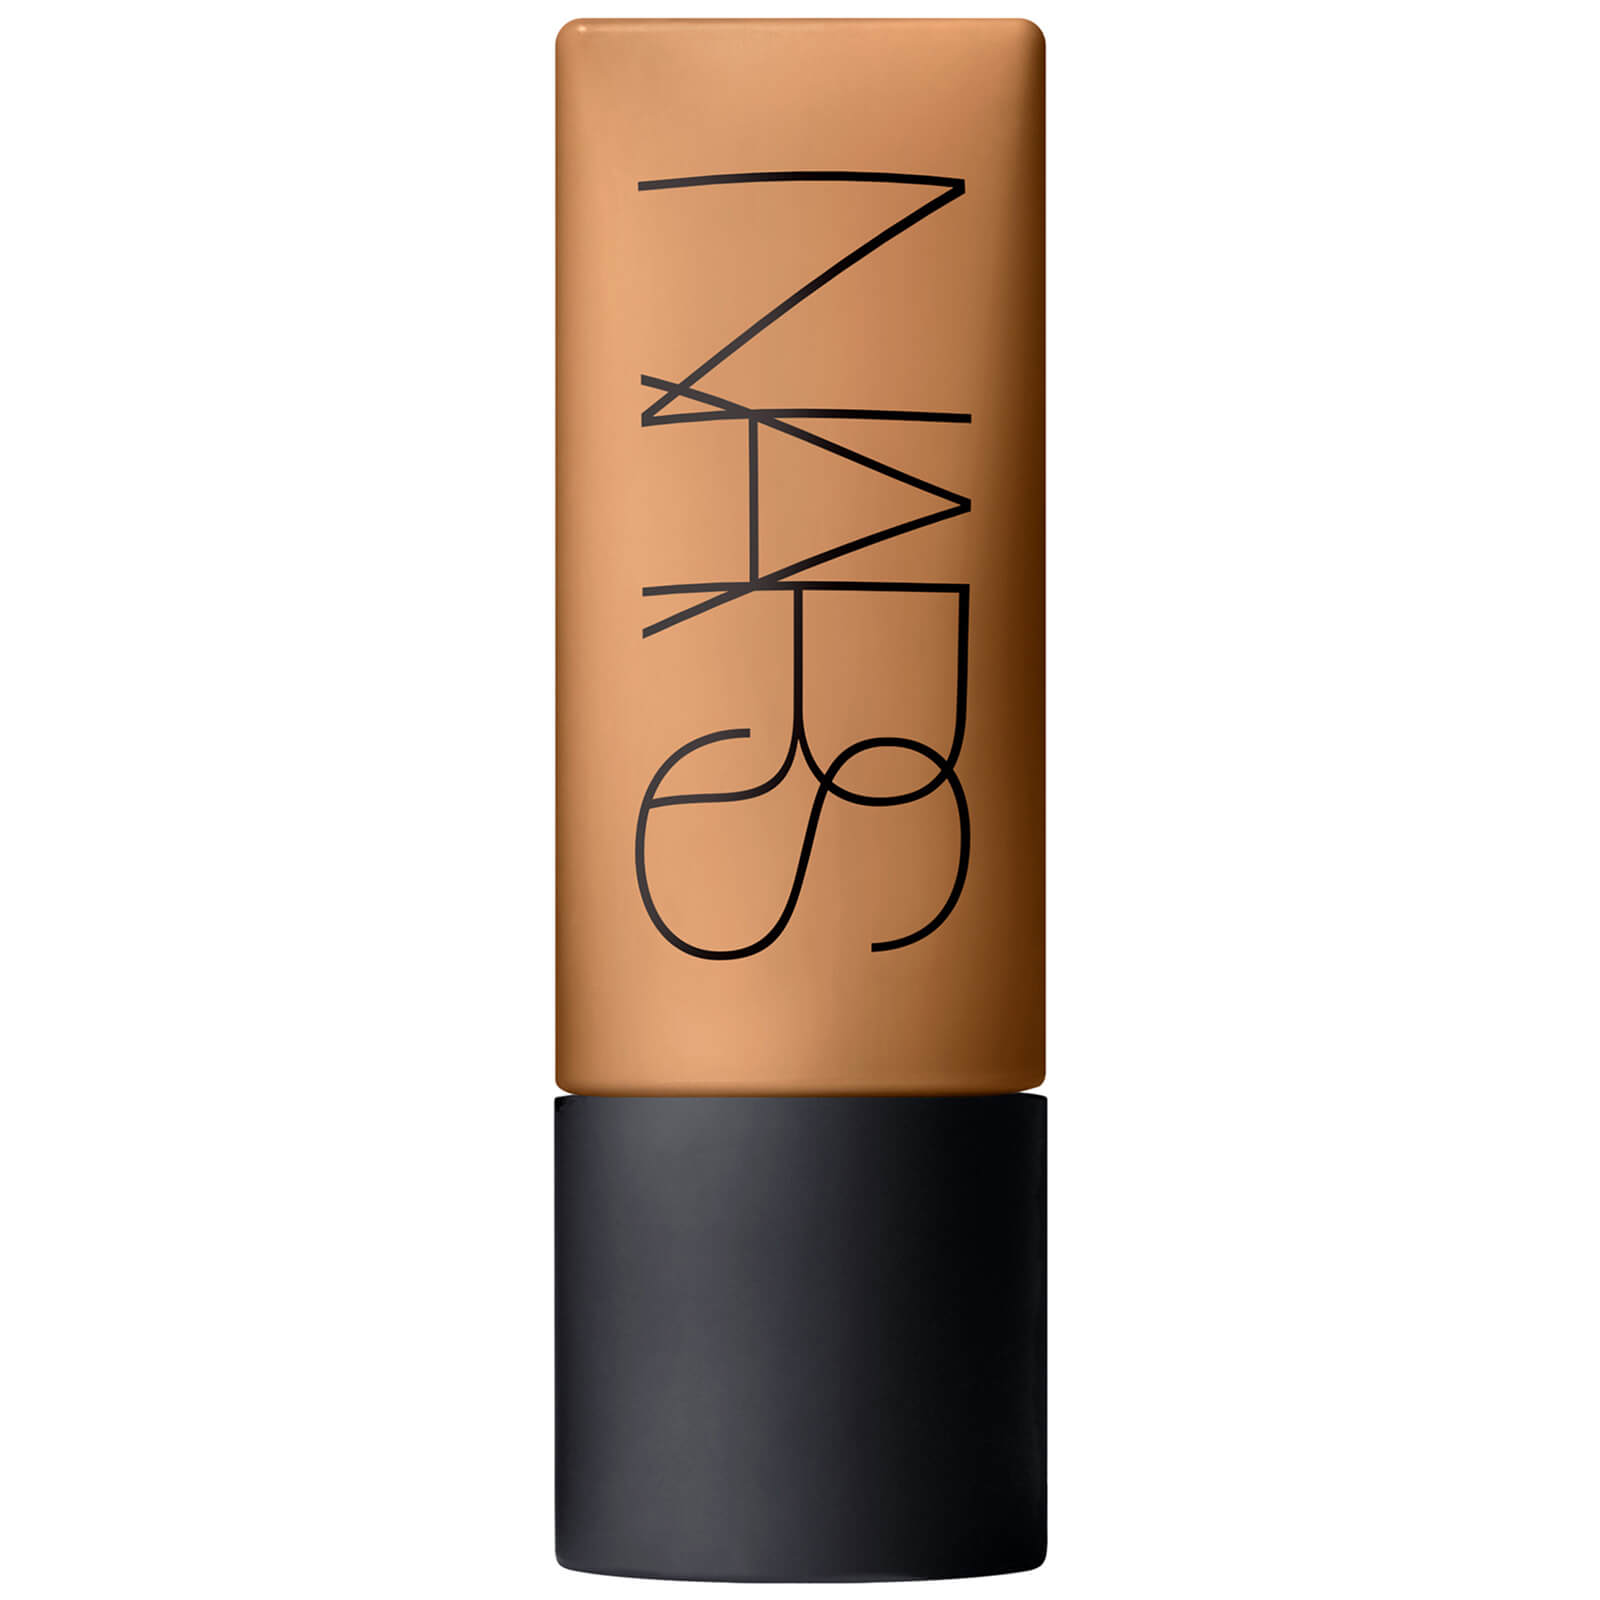 NARS Soft Matte Complete Foundation 45ml (Various Shades) - Tahoe